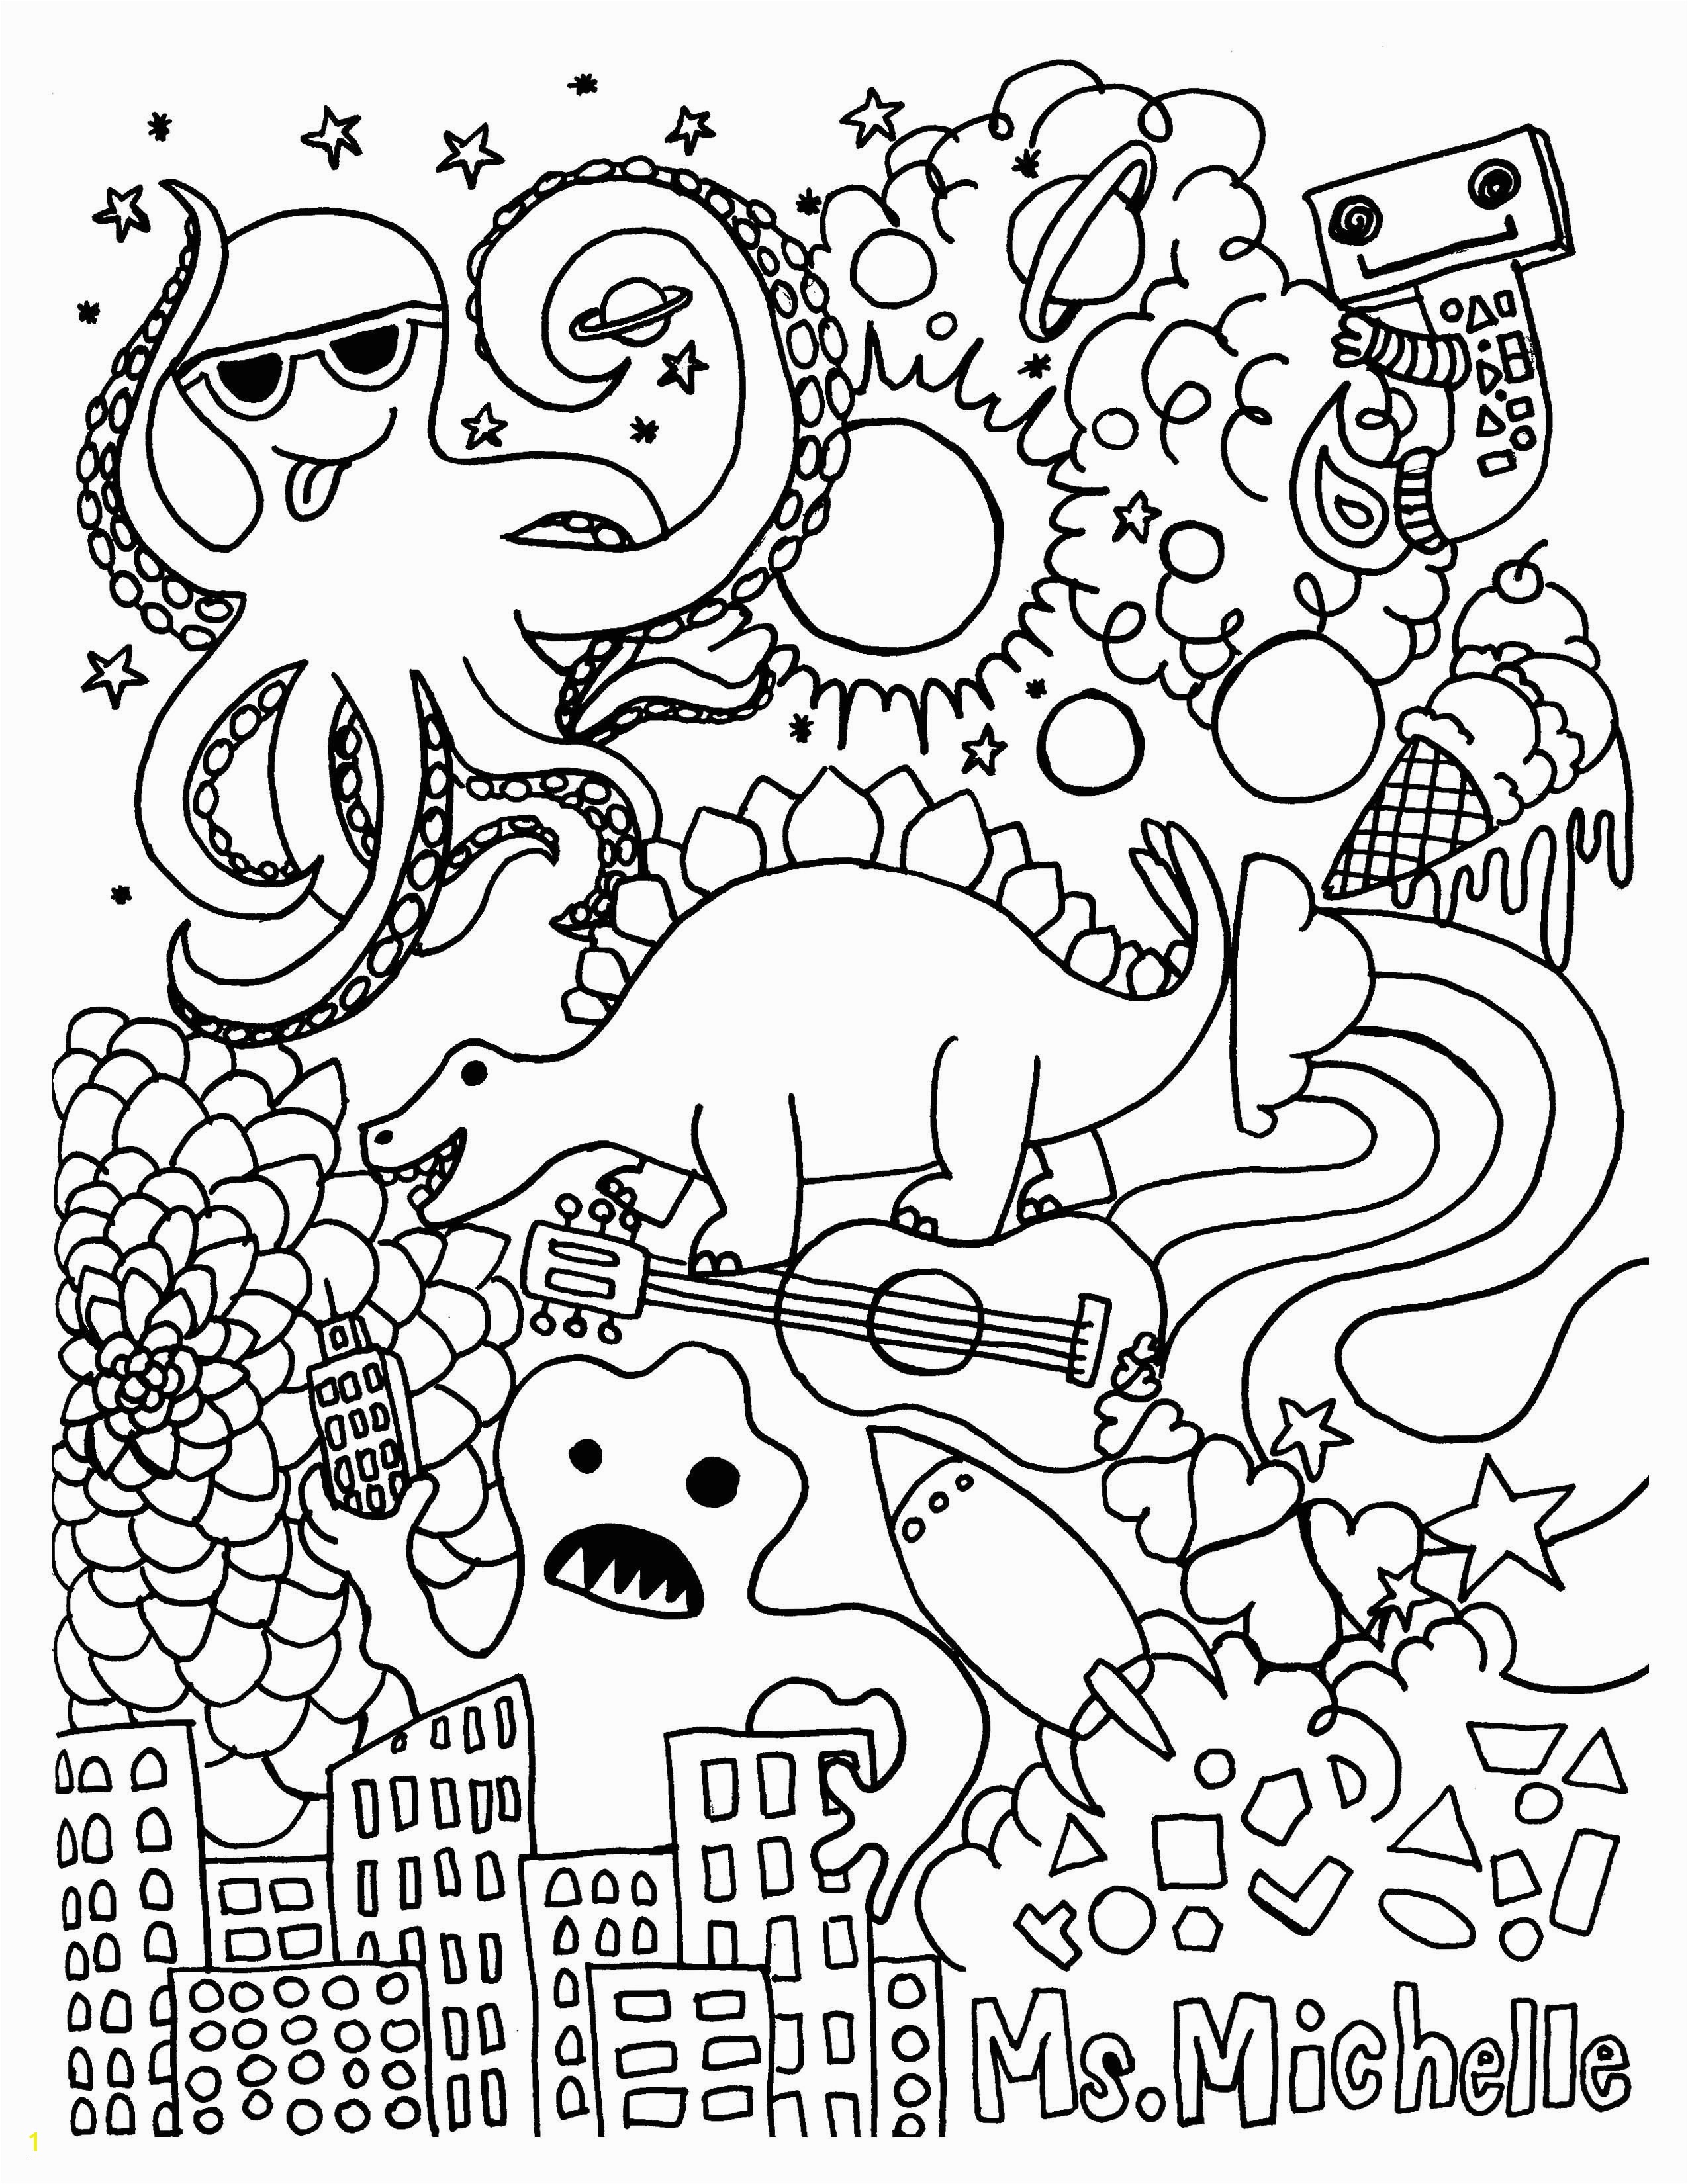 Inspirational Word Coloring Pages 15 Best Inspirational Word Coloring Pages